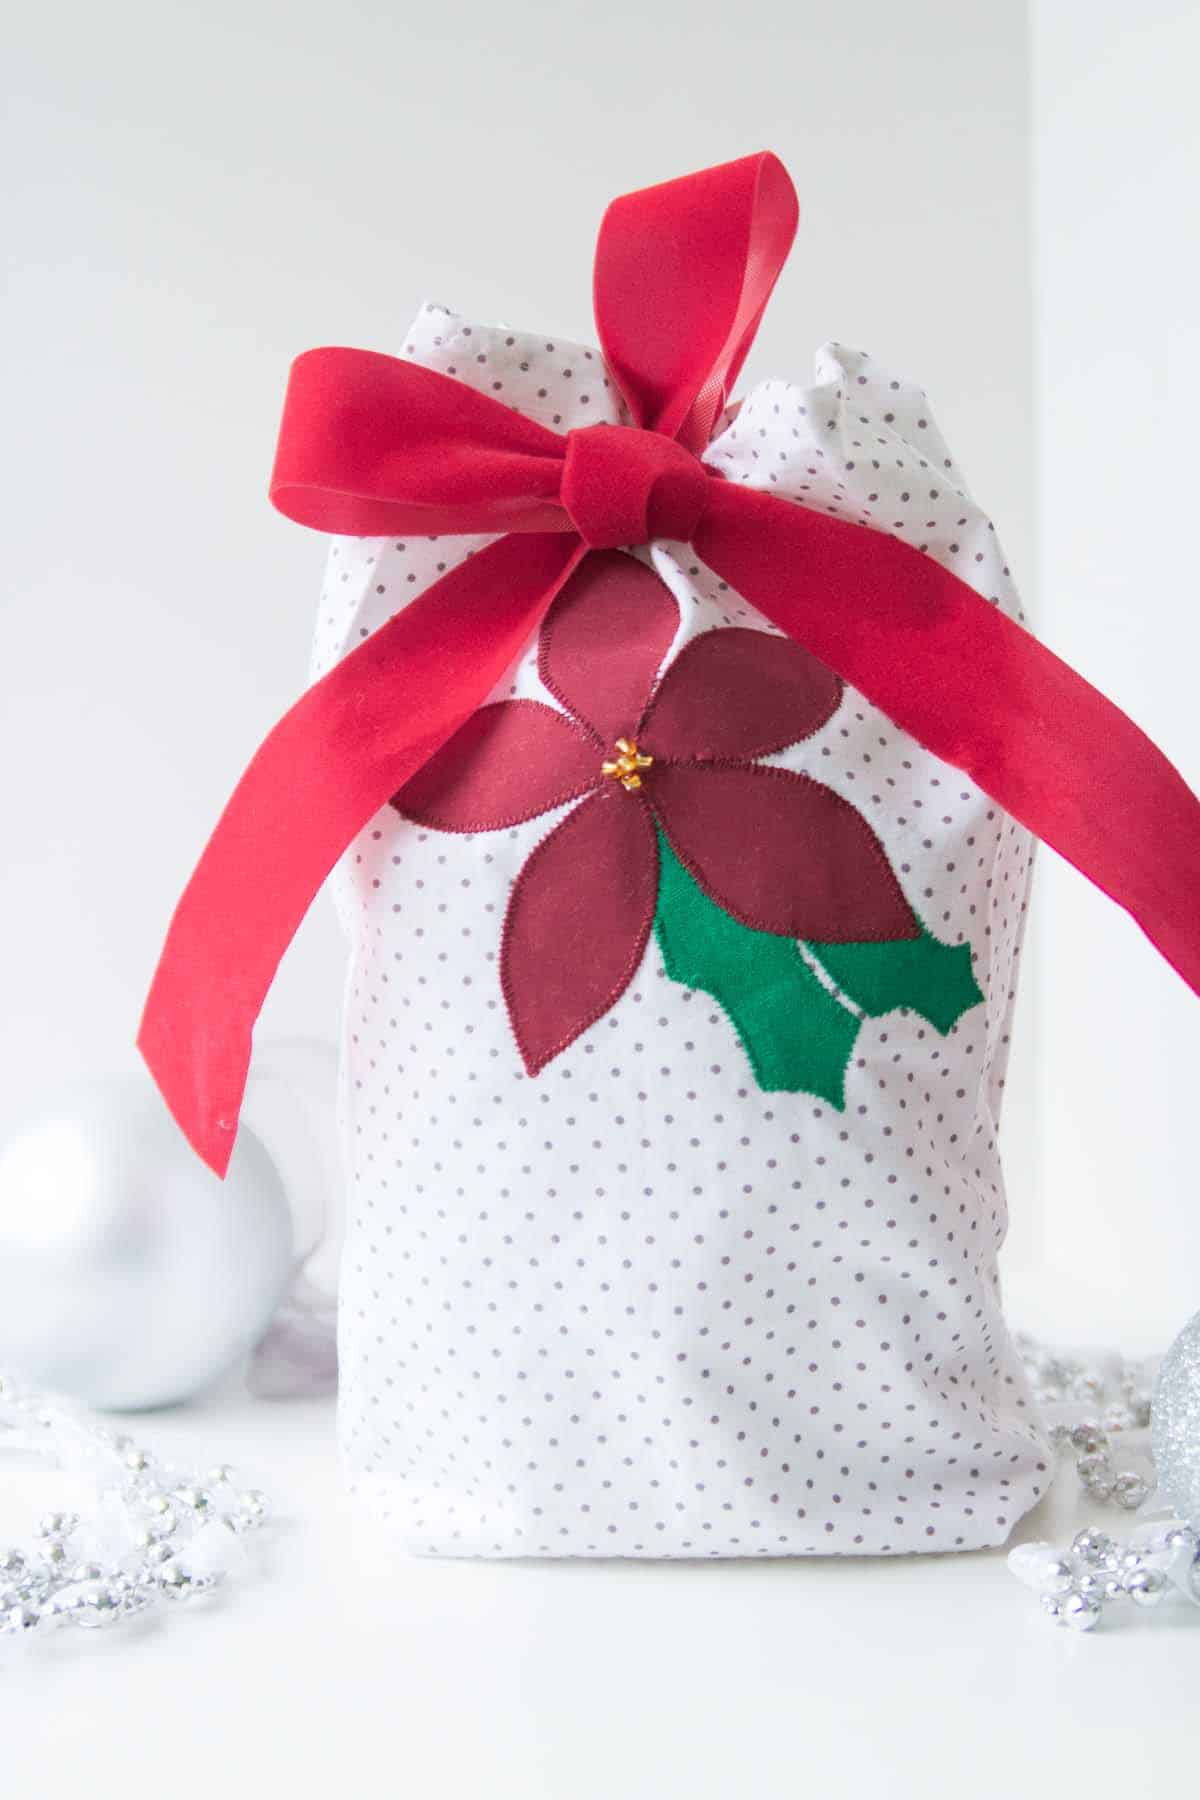 Poinsettia appliquéd gift bag tutorial - sew reusable gift bags and use up your scraps! Sewing tutorial by Melly Sews